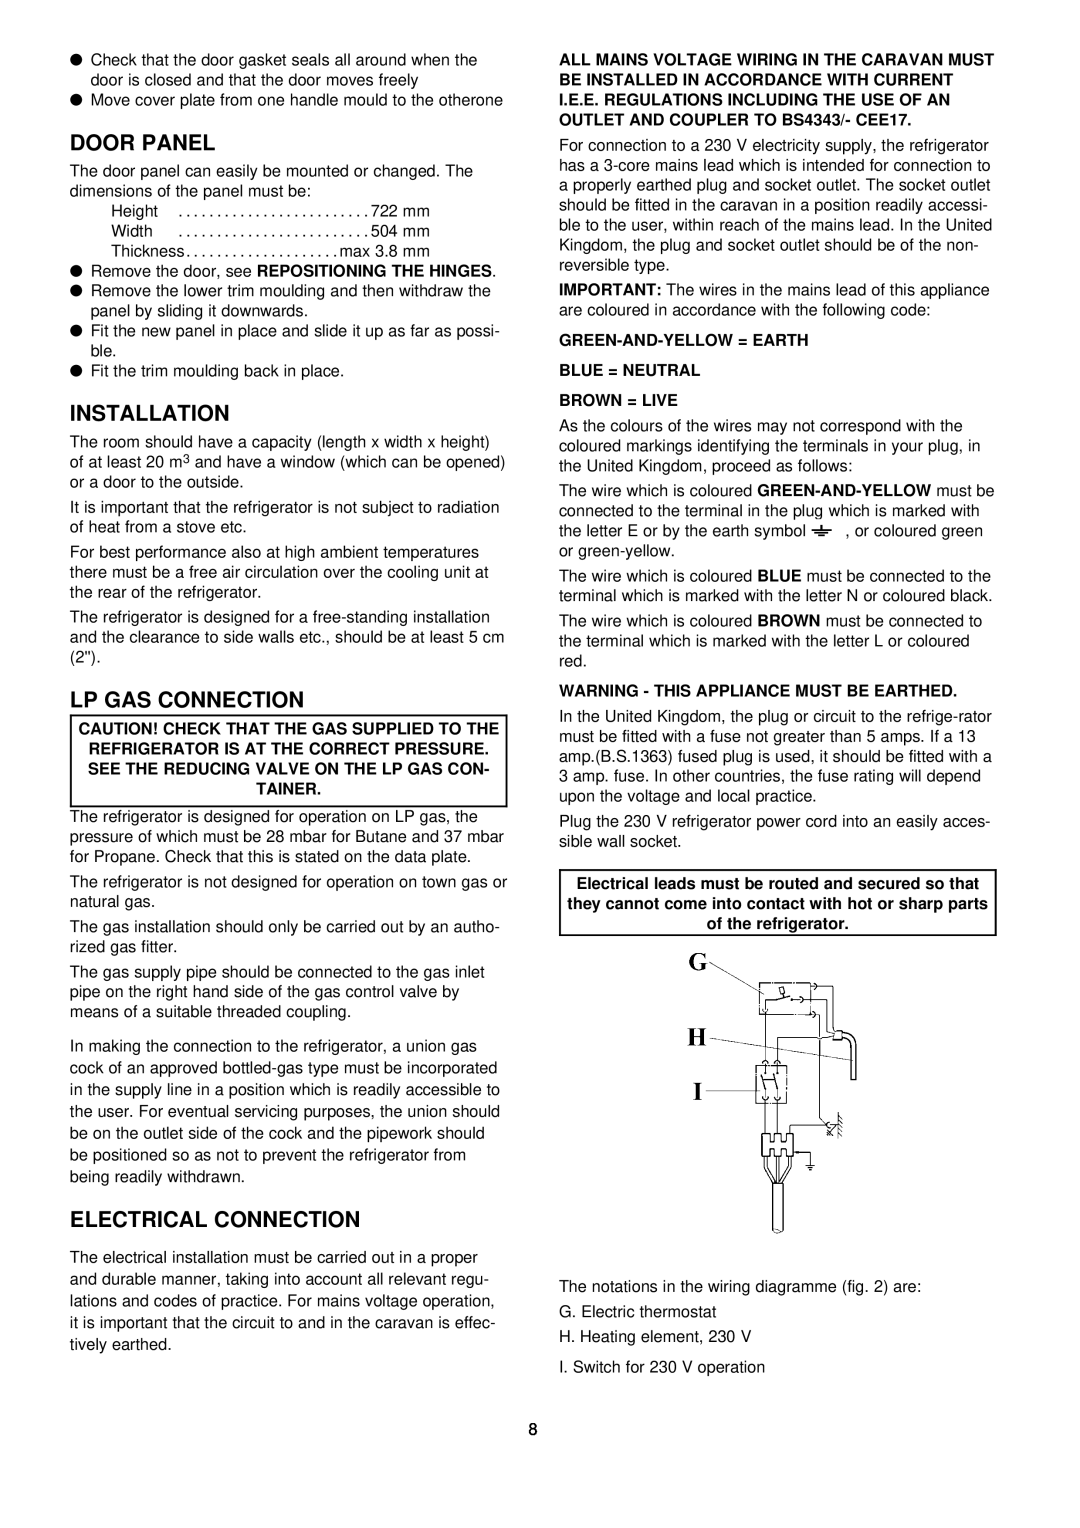 Frigidaire S105GE installation instructions Door Panel, Installation, Lp Gas Connection, Electrical Connection 